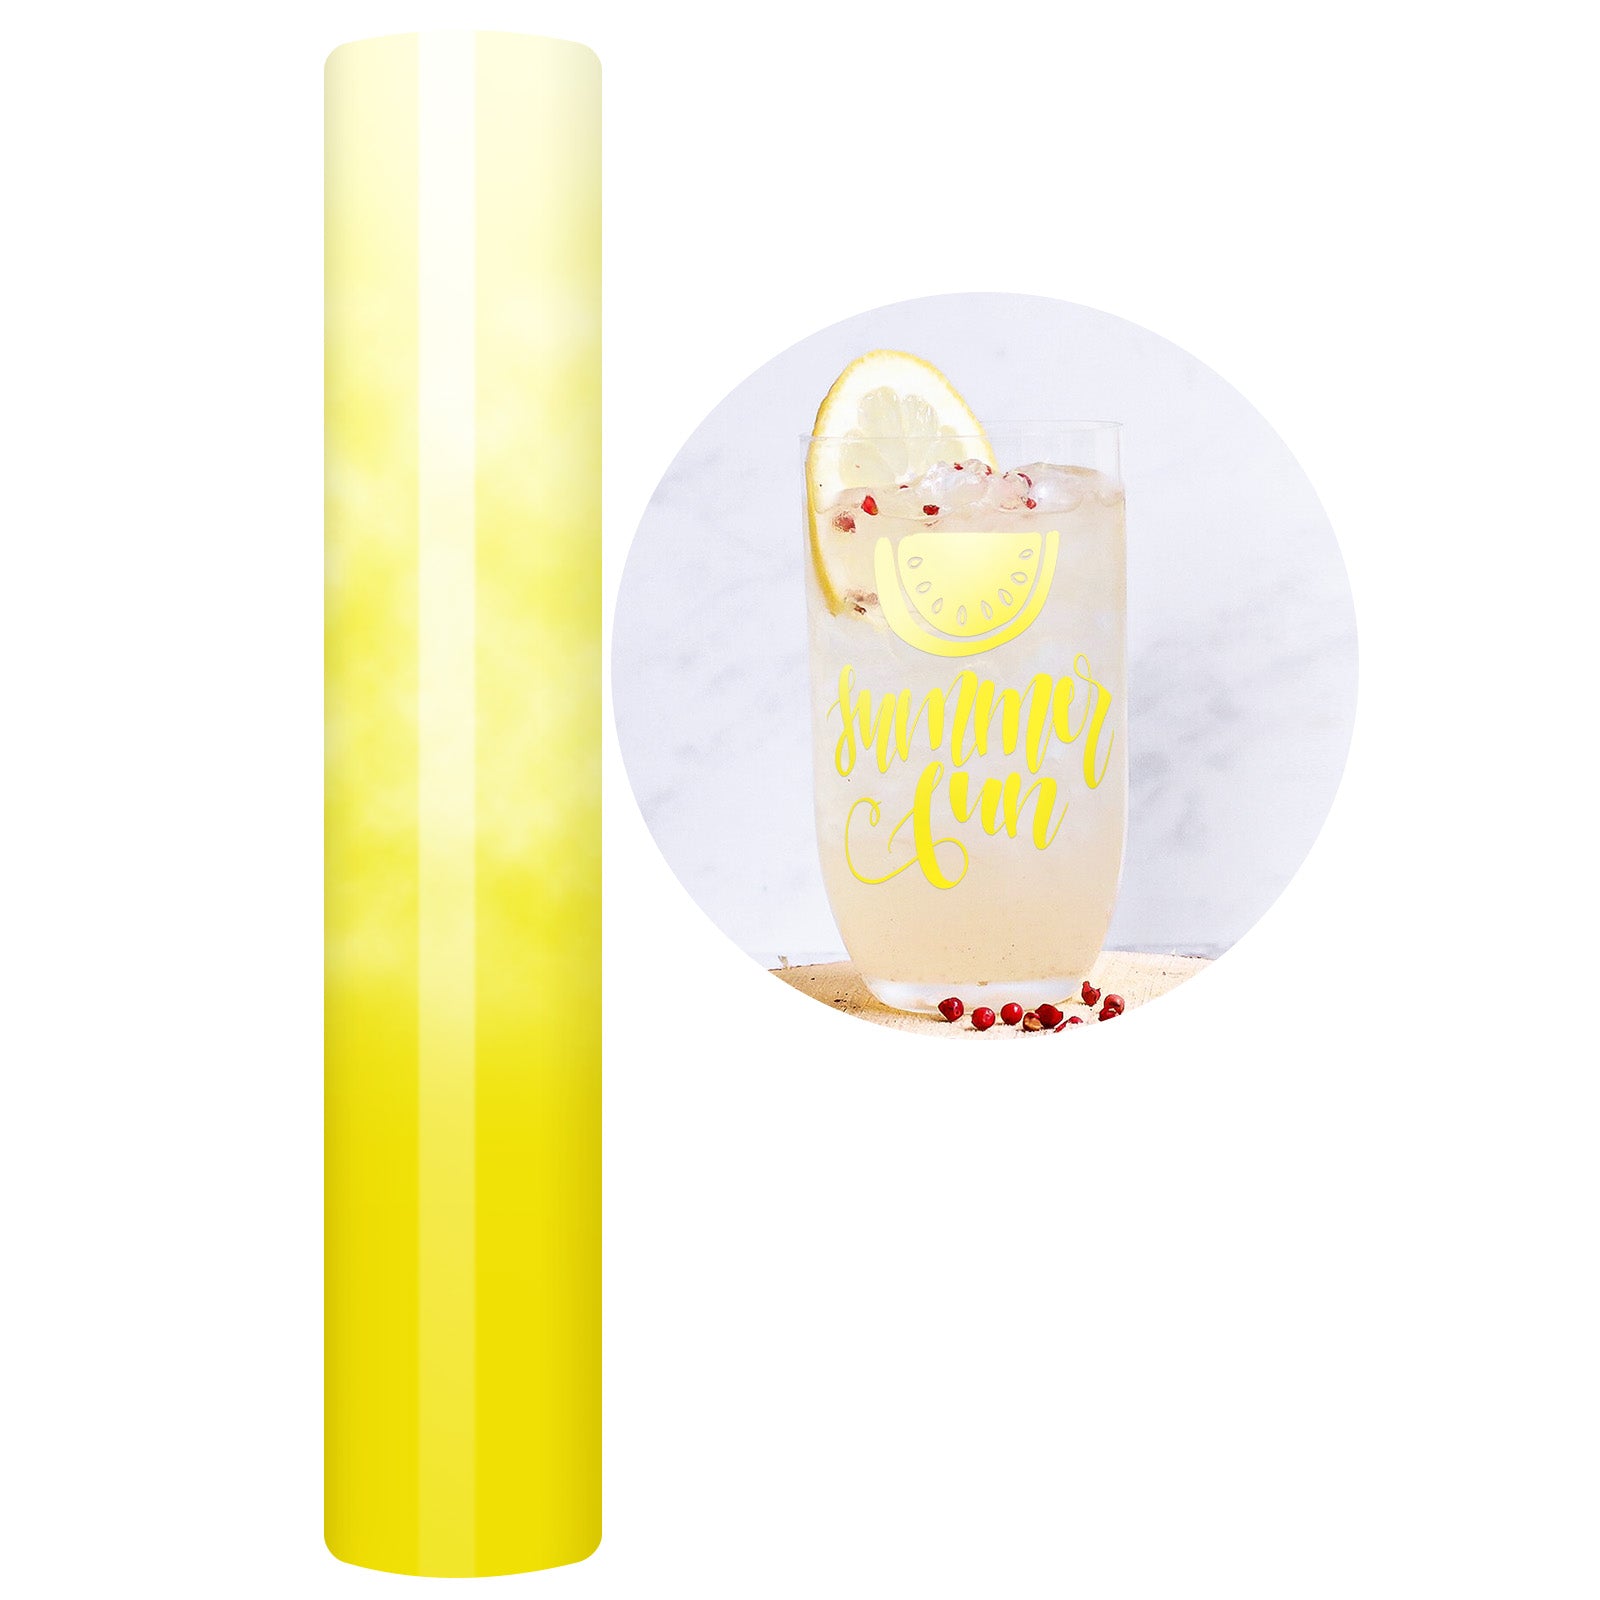 Clear Cold Yellow Color Changing Adhesive Vinyl –